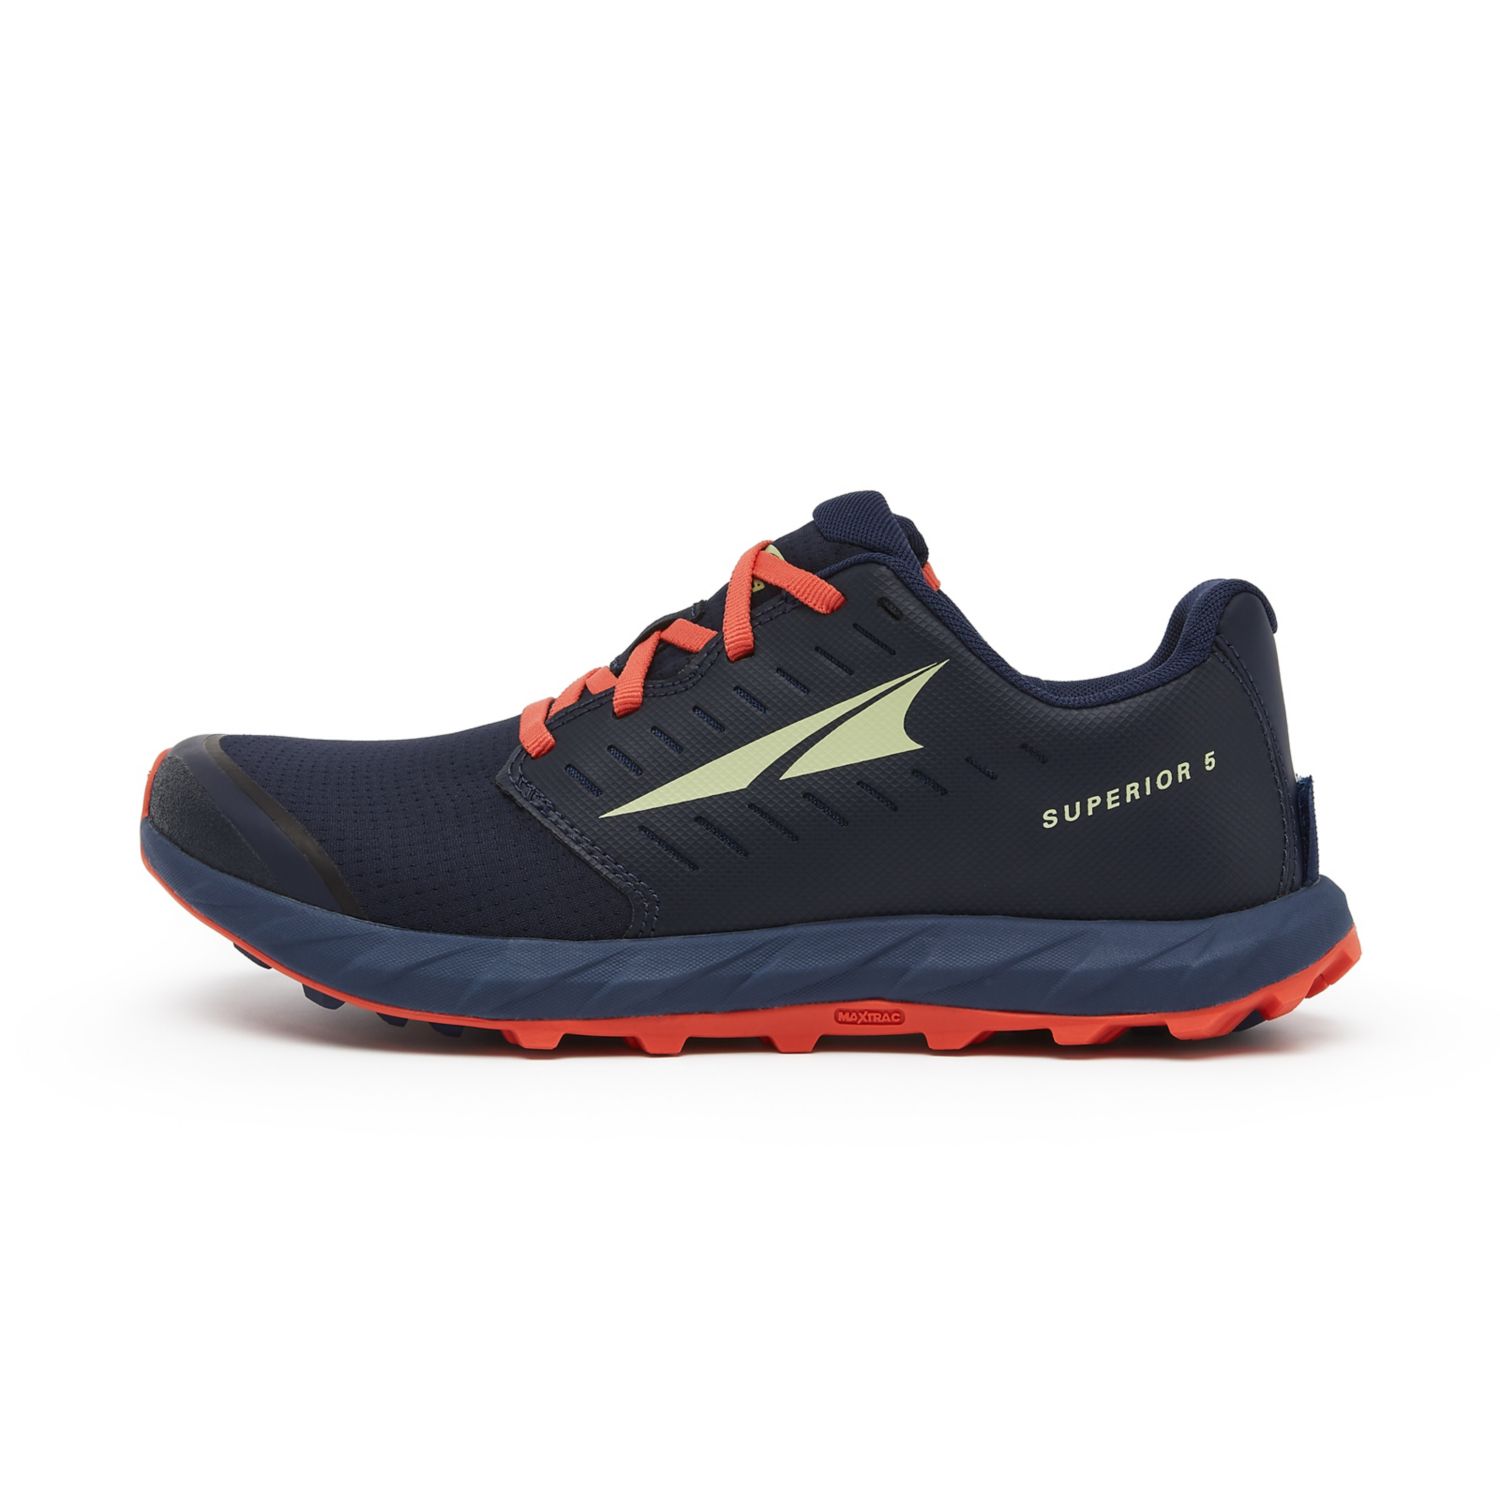 Altra Superior 5 Women's Trail Running Shoes Dark Blue | South Africa-09526379